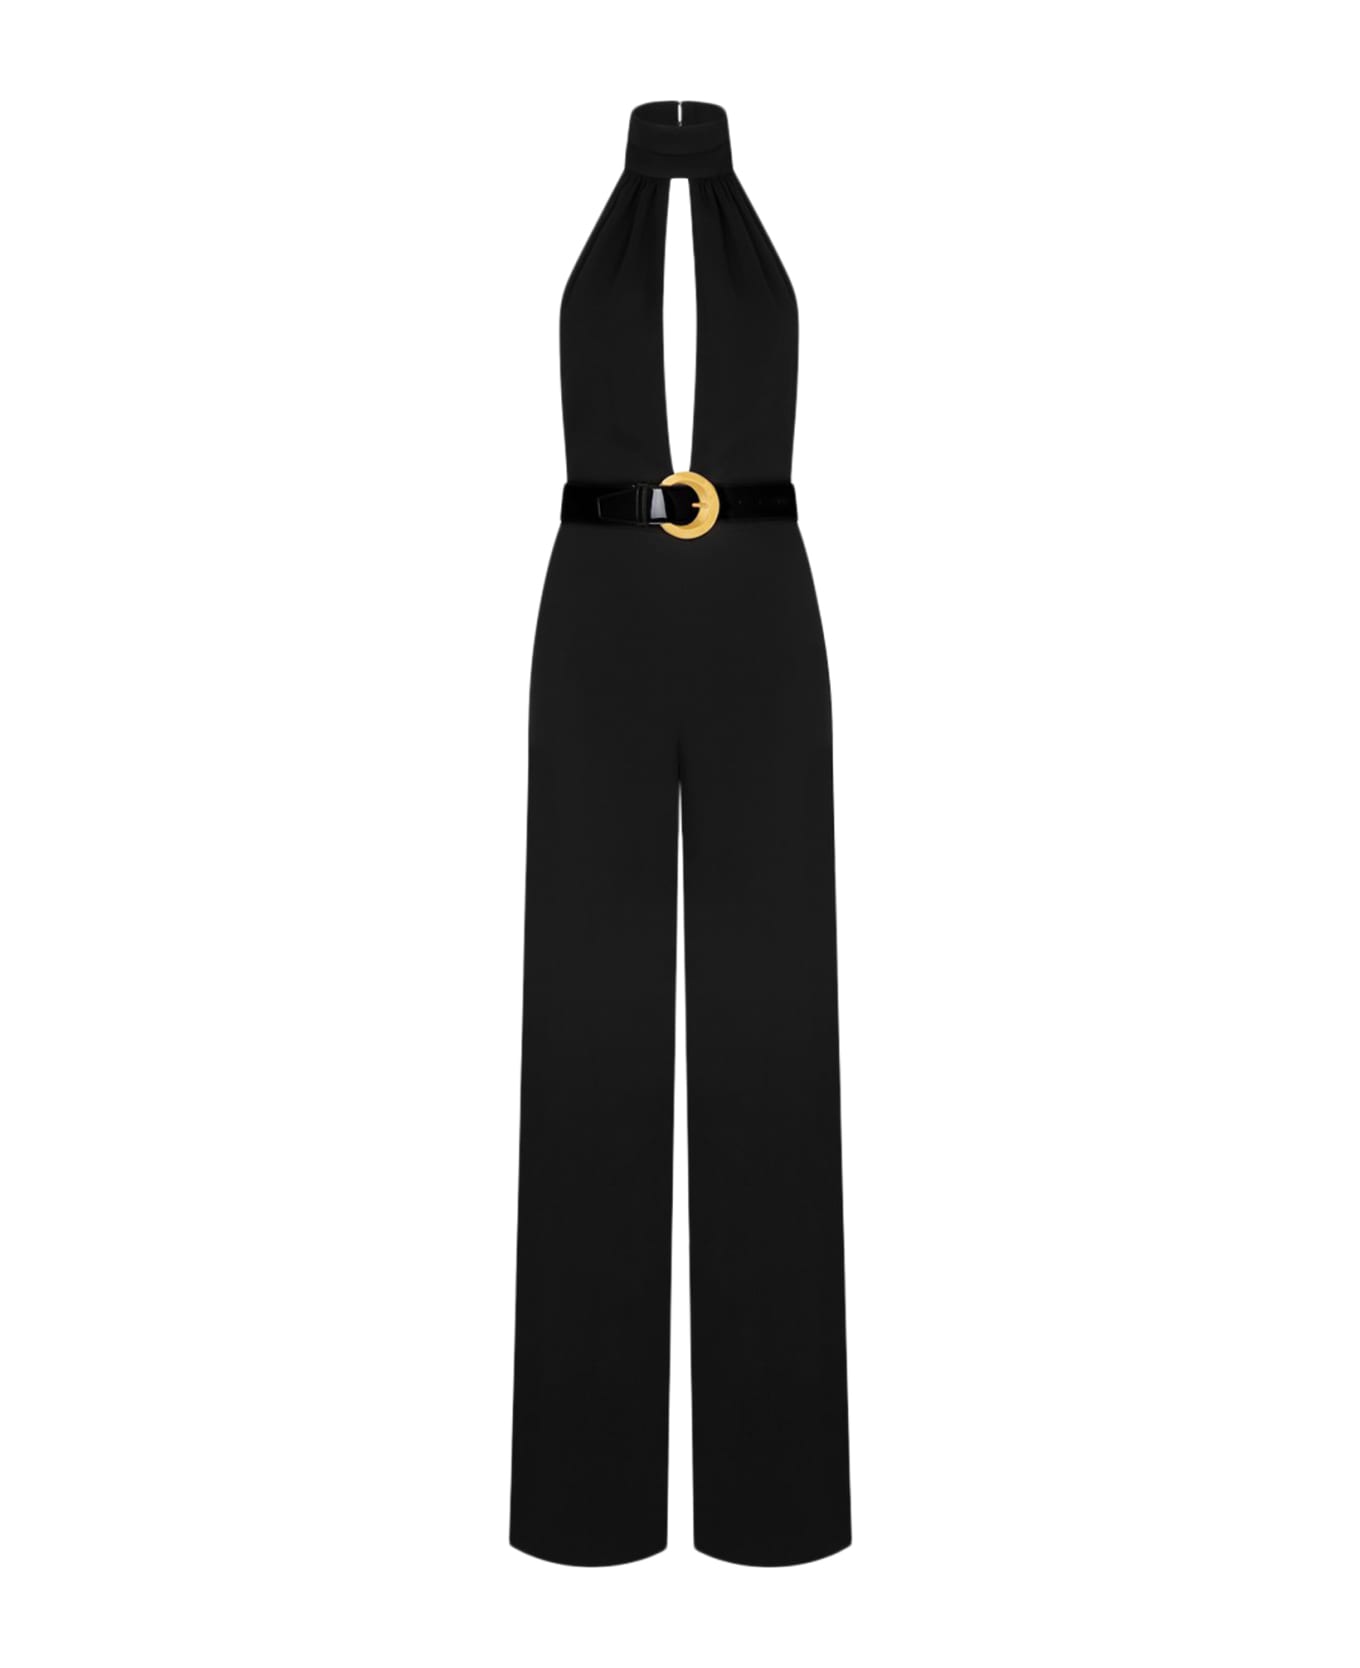 Tom Ford Stretch Sable` Jumpsuit - Black ジャンプスーツ